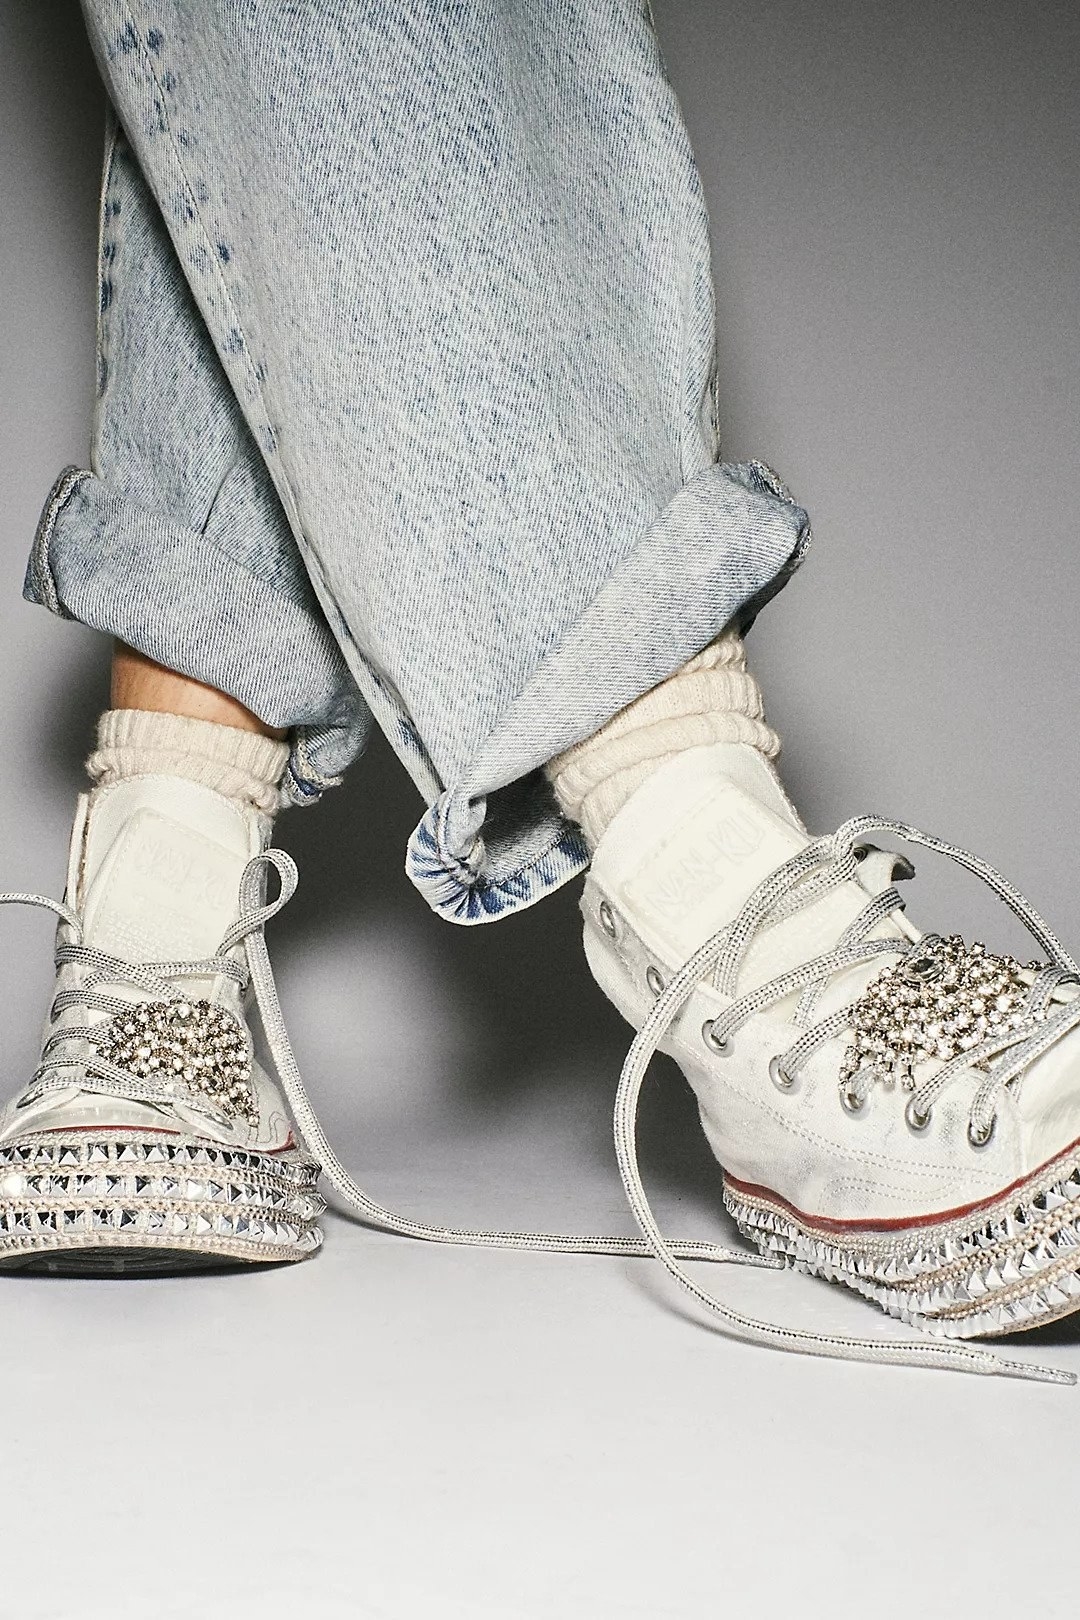 white converse with bedazzled details and studded soles